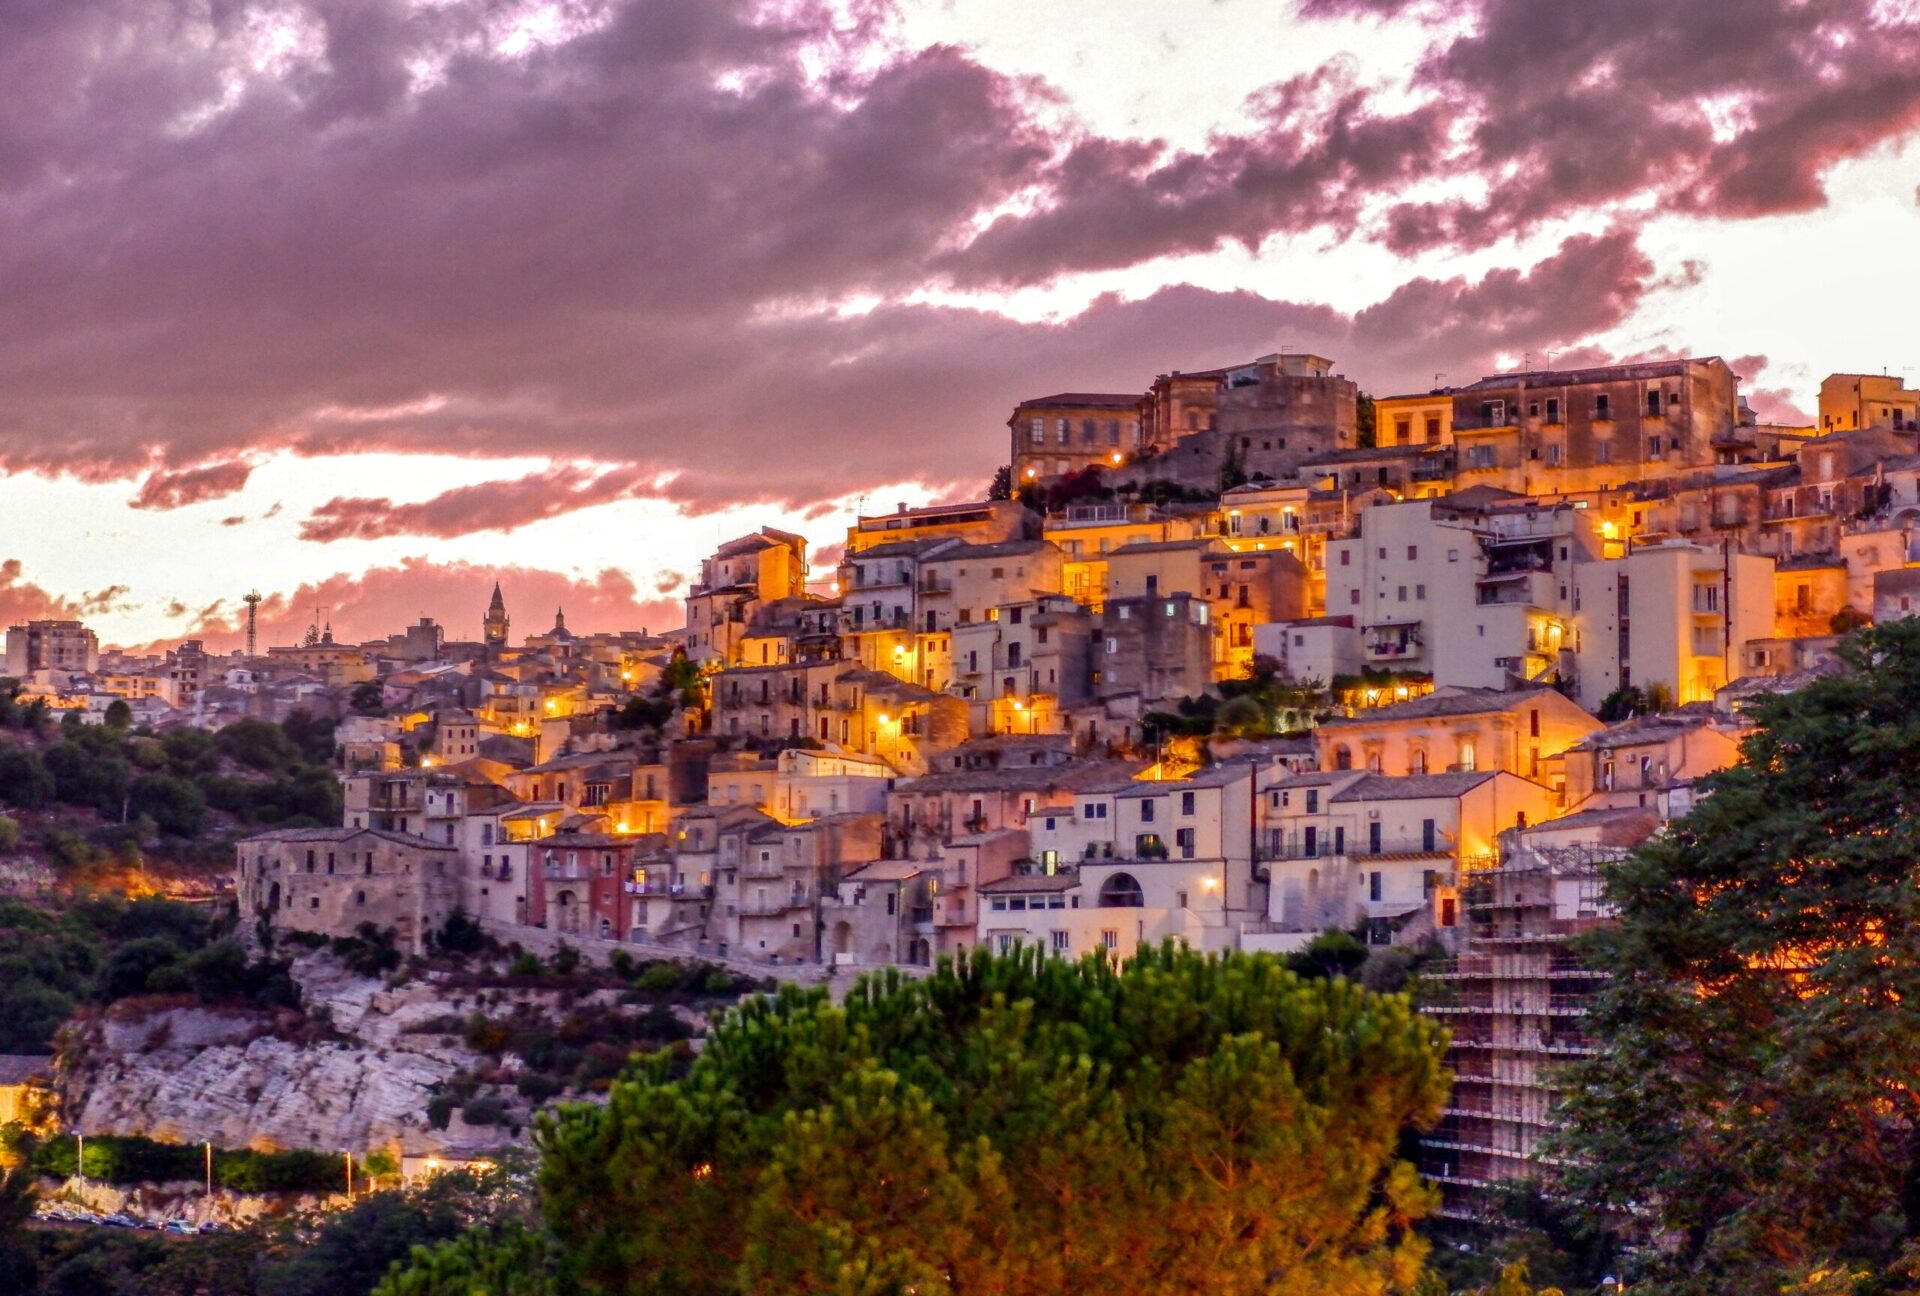 What to see in Ragusa Ibla